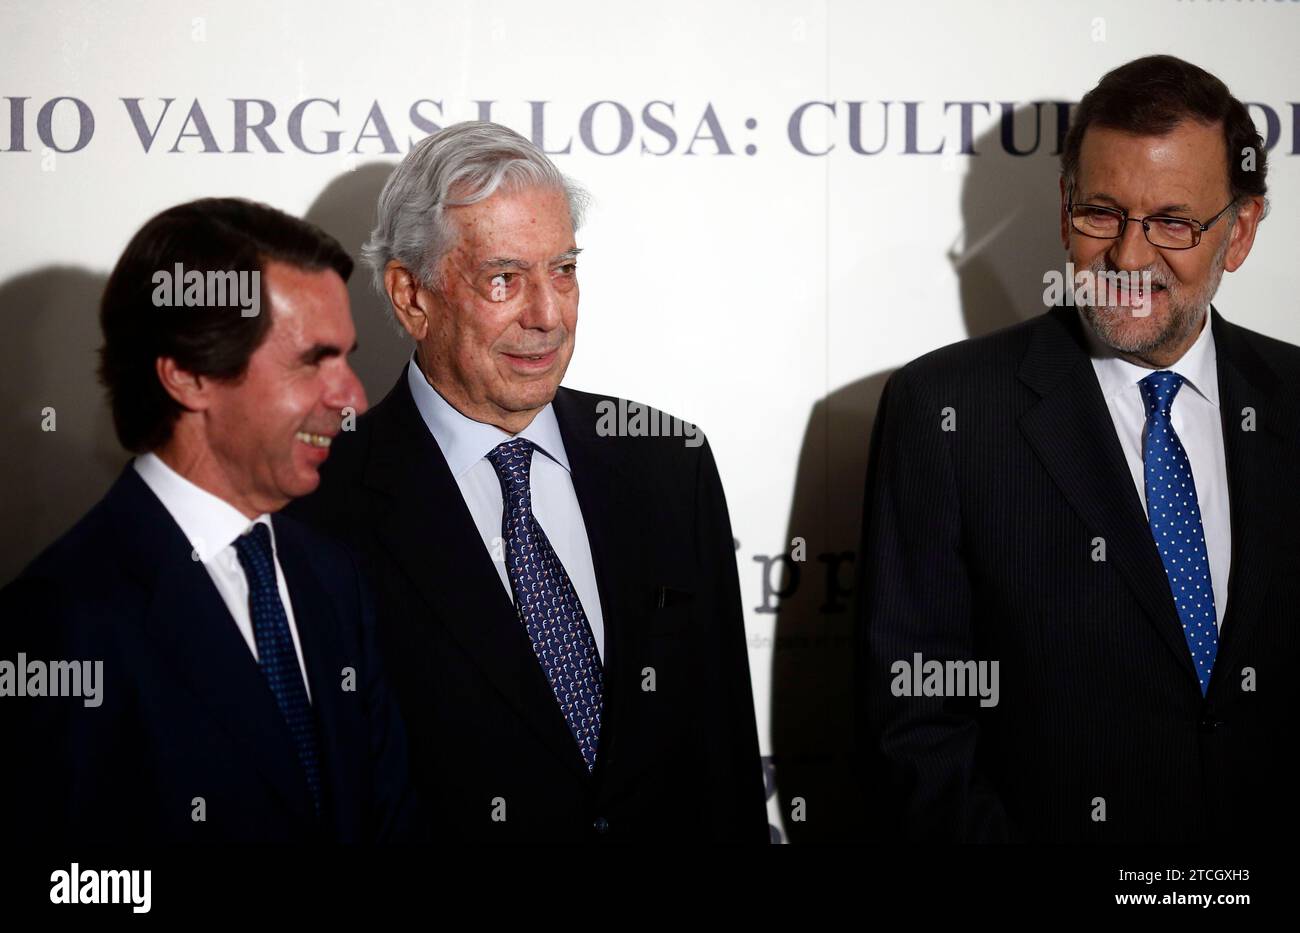 Madrid, 03/29/2016. Tribute event to Mario Vargas Llosa with the assistance of the acting President of the Government Mariano Rajoy, the former presidents José María Aznar and Felipe González, among others. Photo: Oscar del Pozo ARCHDC. Credit: Album / Archivo ABC / Oscar del Pozo Stock Photo